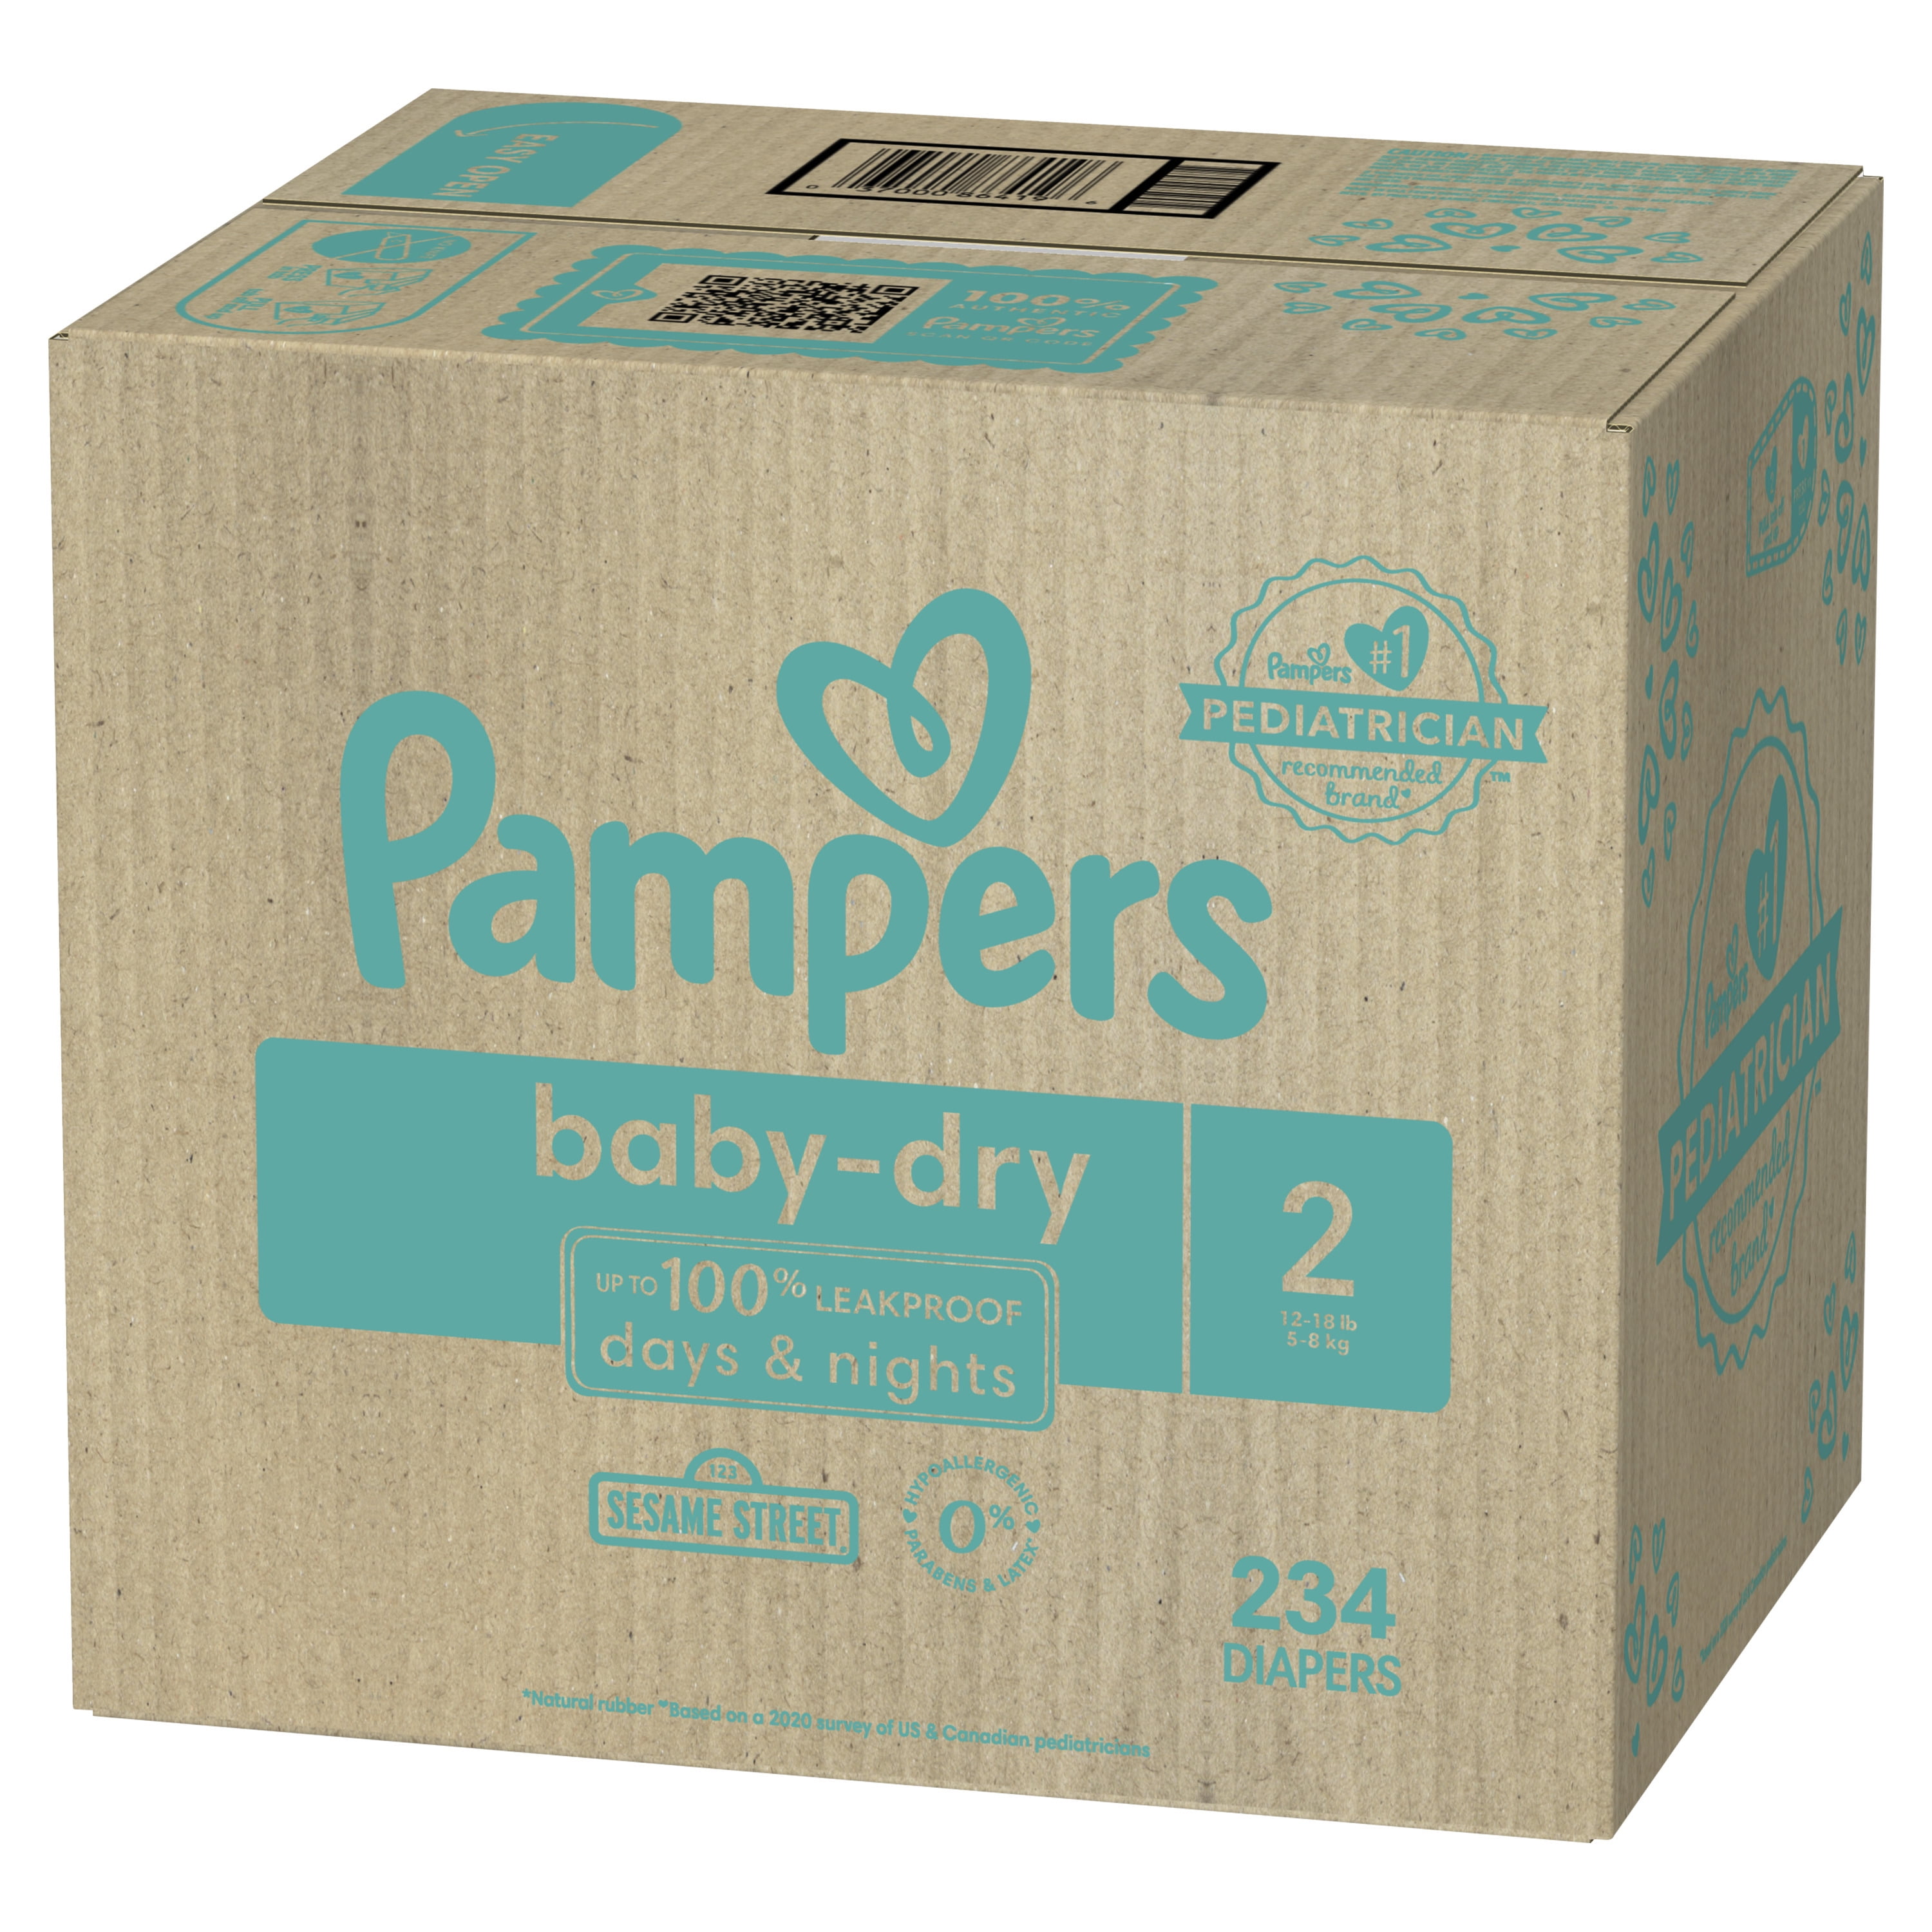 Pampers Baby-Dry - Pañales desechables absorbentes, talla 2, 234 unidades